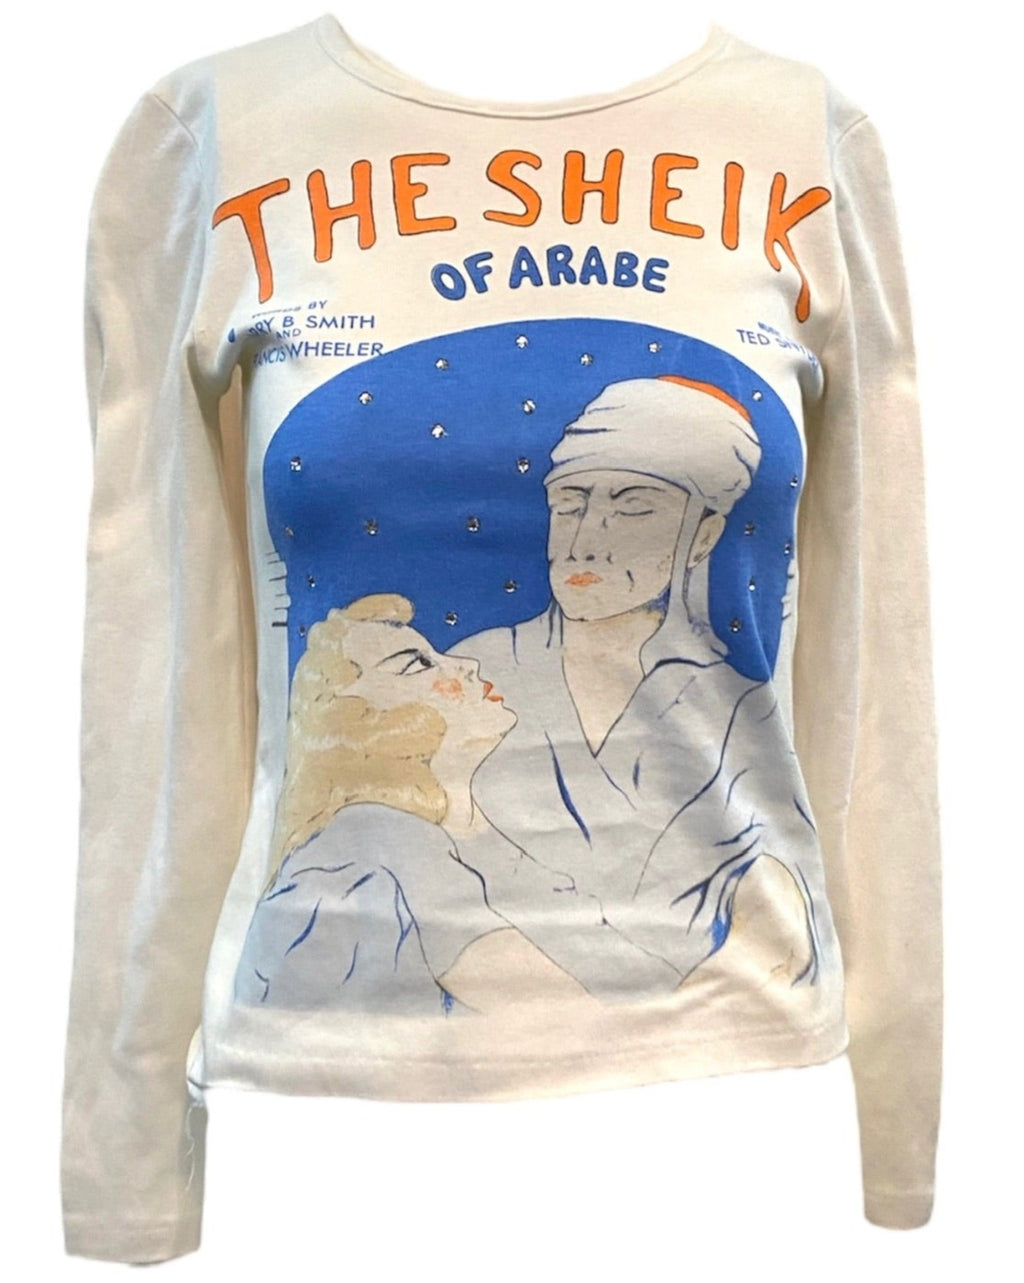  1974 Rudolph Valentino Sheik of Arabe White  Long Sleeve Tee FRONT 1 of 3